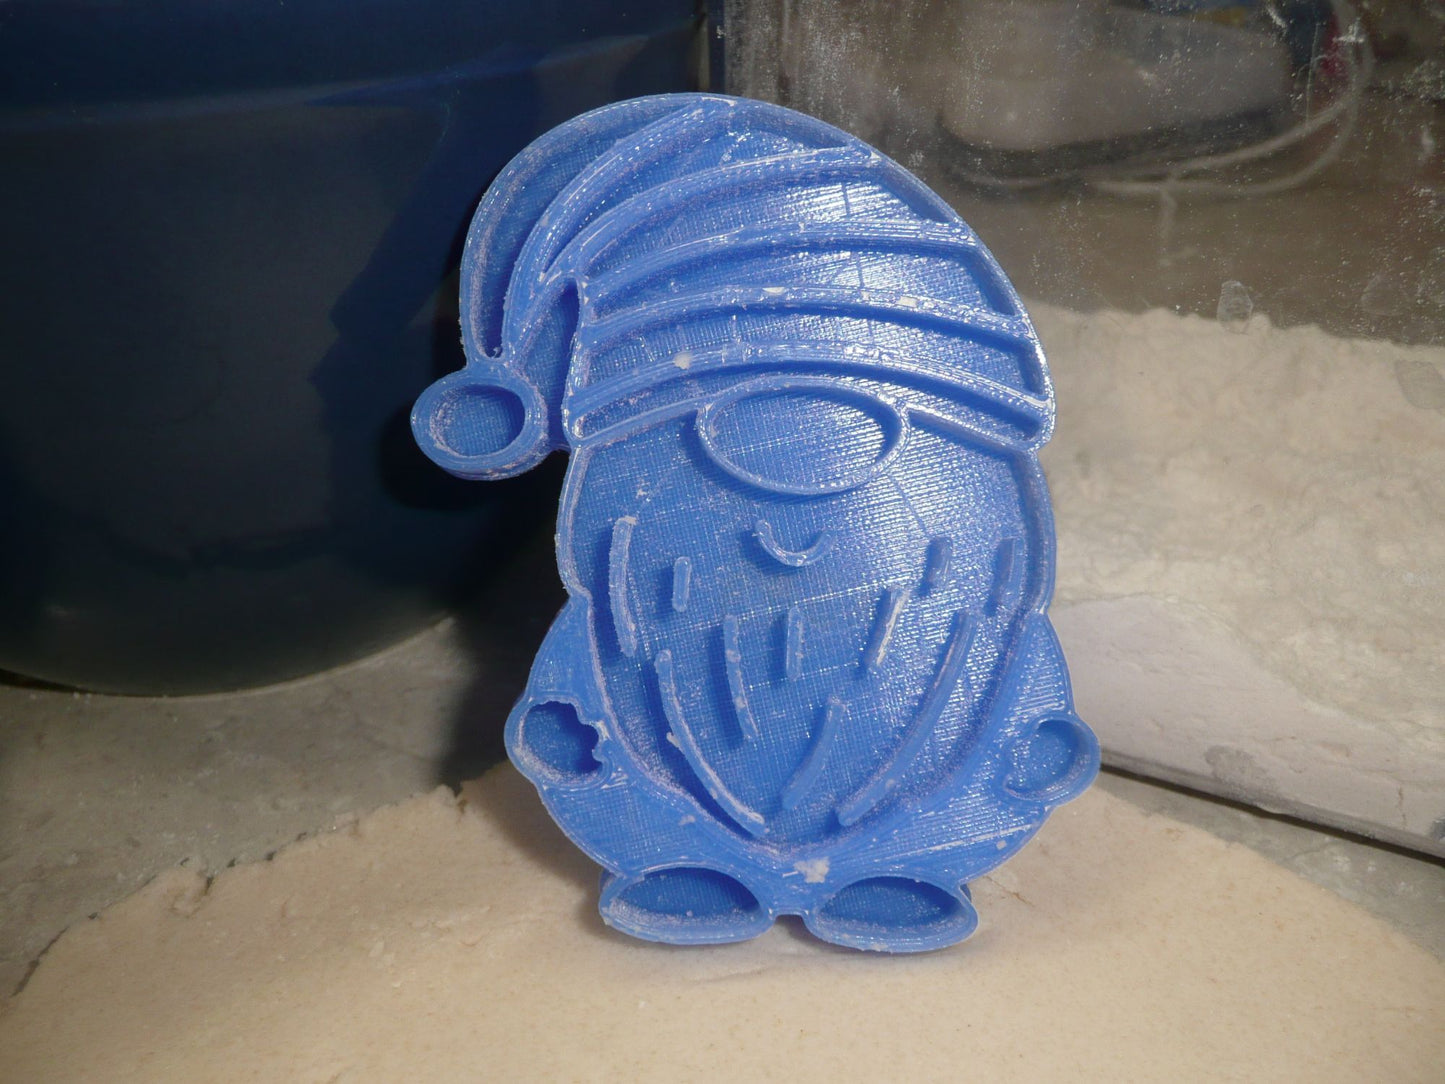 Gnome 1 Dwarf Goblin Mythical Creature Cookie Stamp Embosser USA PR4503